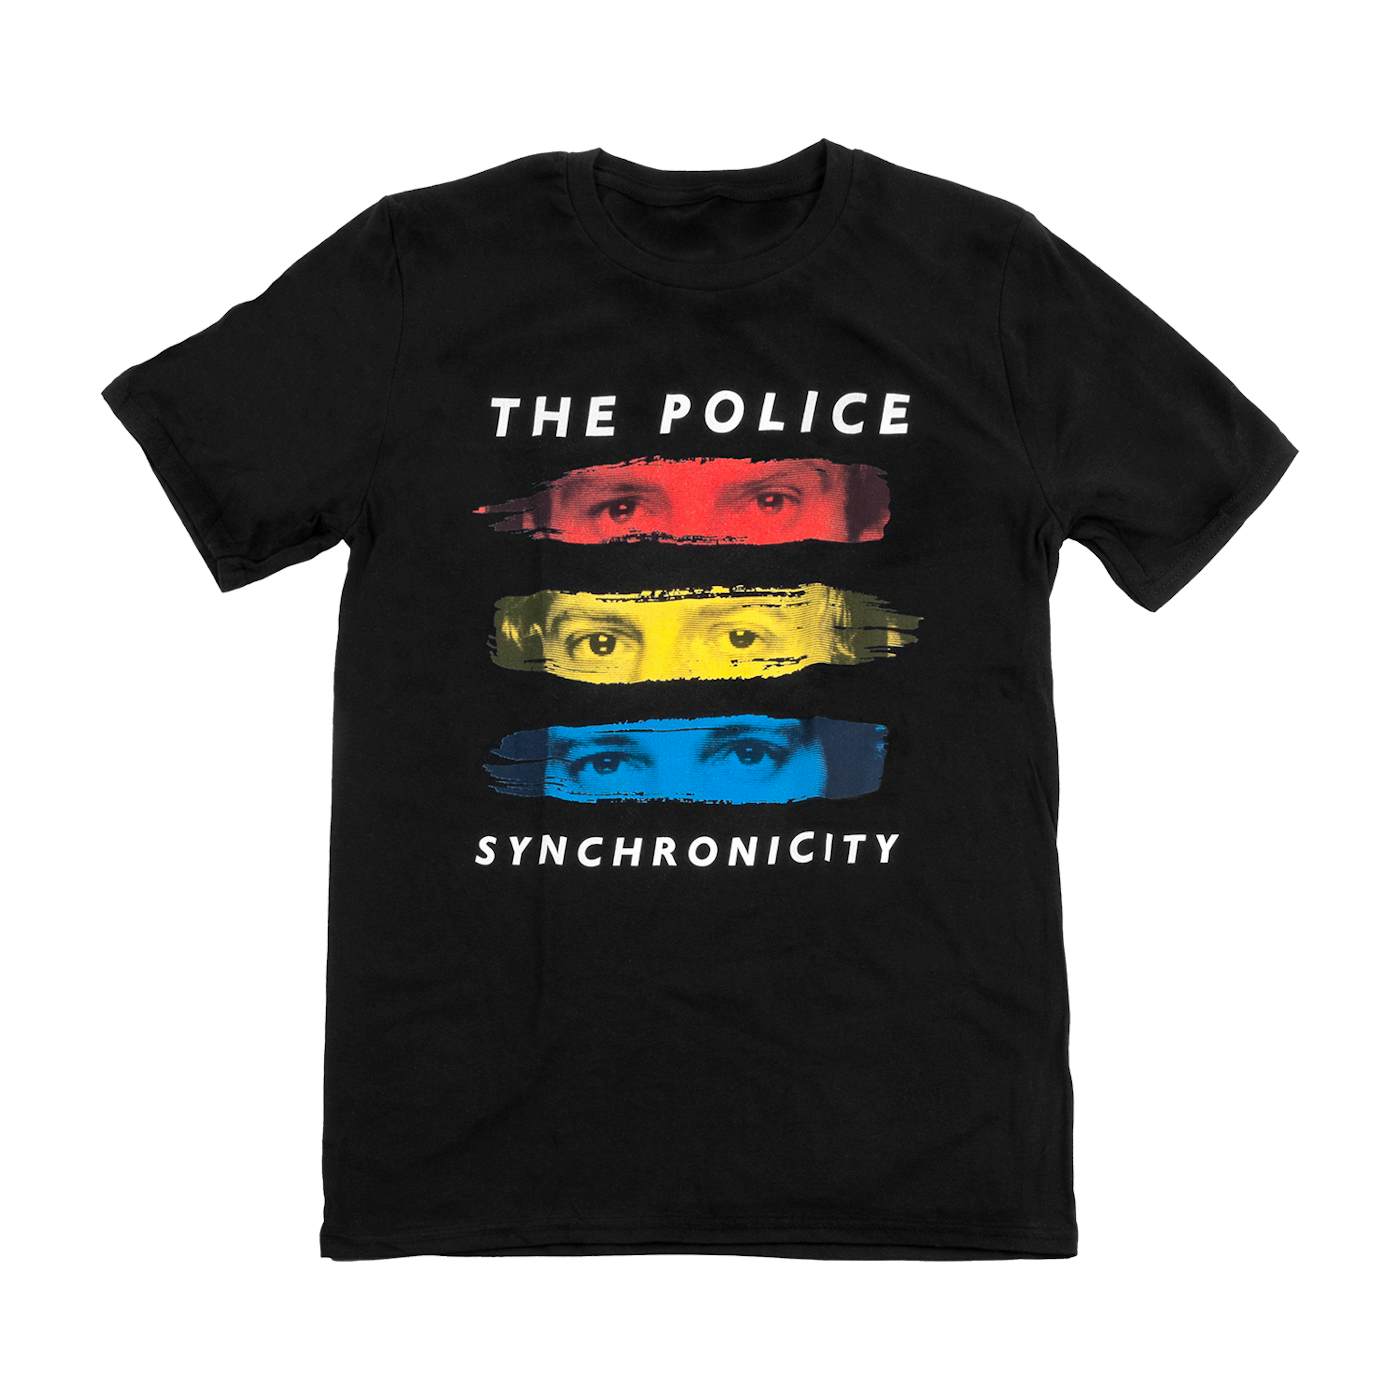 The Police Synchronicity T-shirt, Longsleeve T-shirt, Crewneck, or Pullover